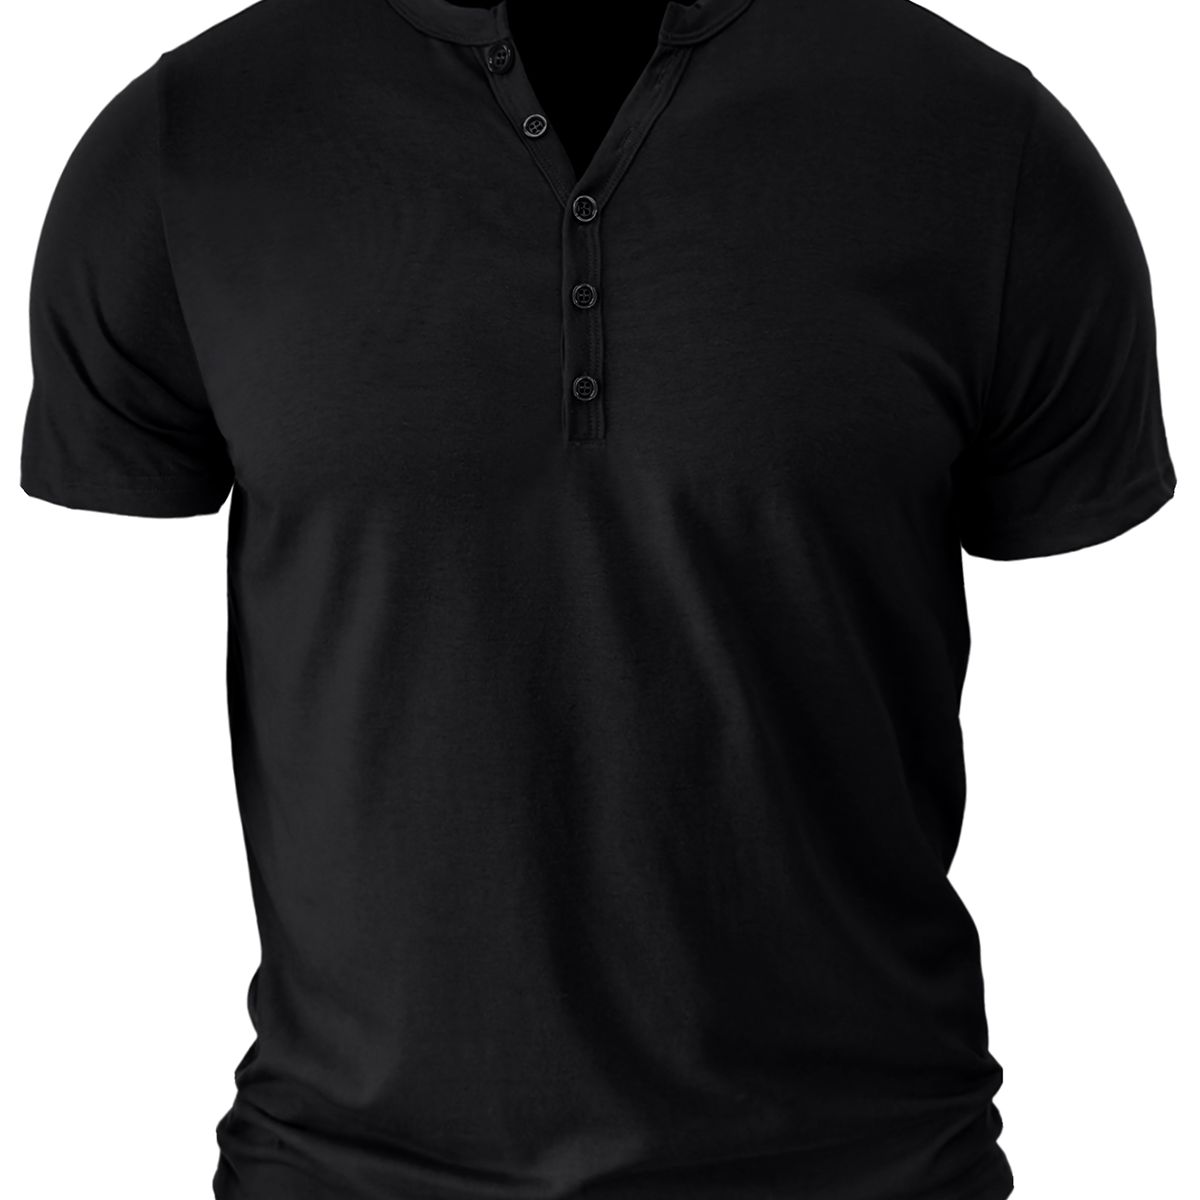 Men's V Neck Breathable Solid Color Casual Cotton Short Sleeve T-Shirt